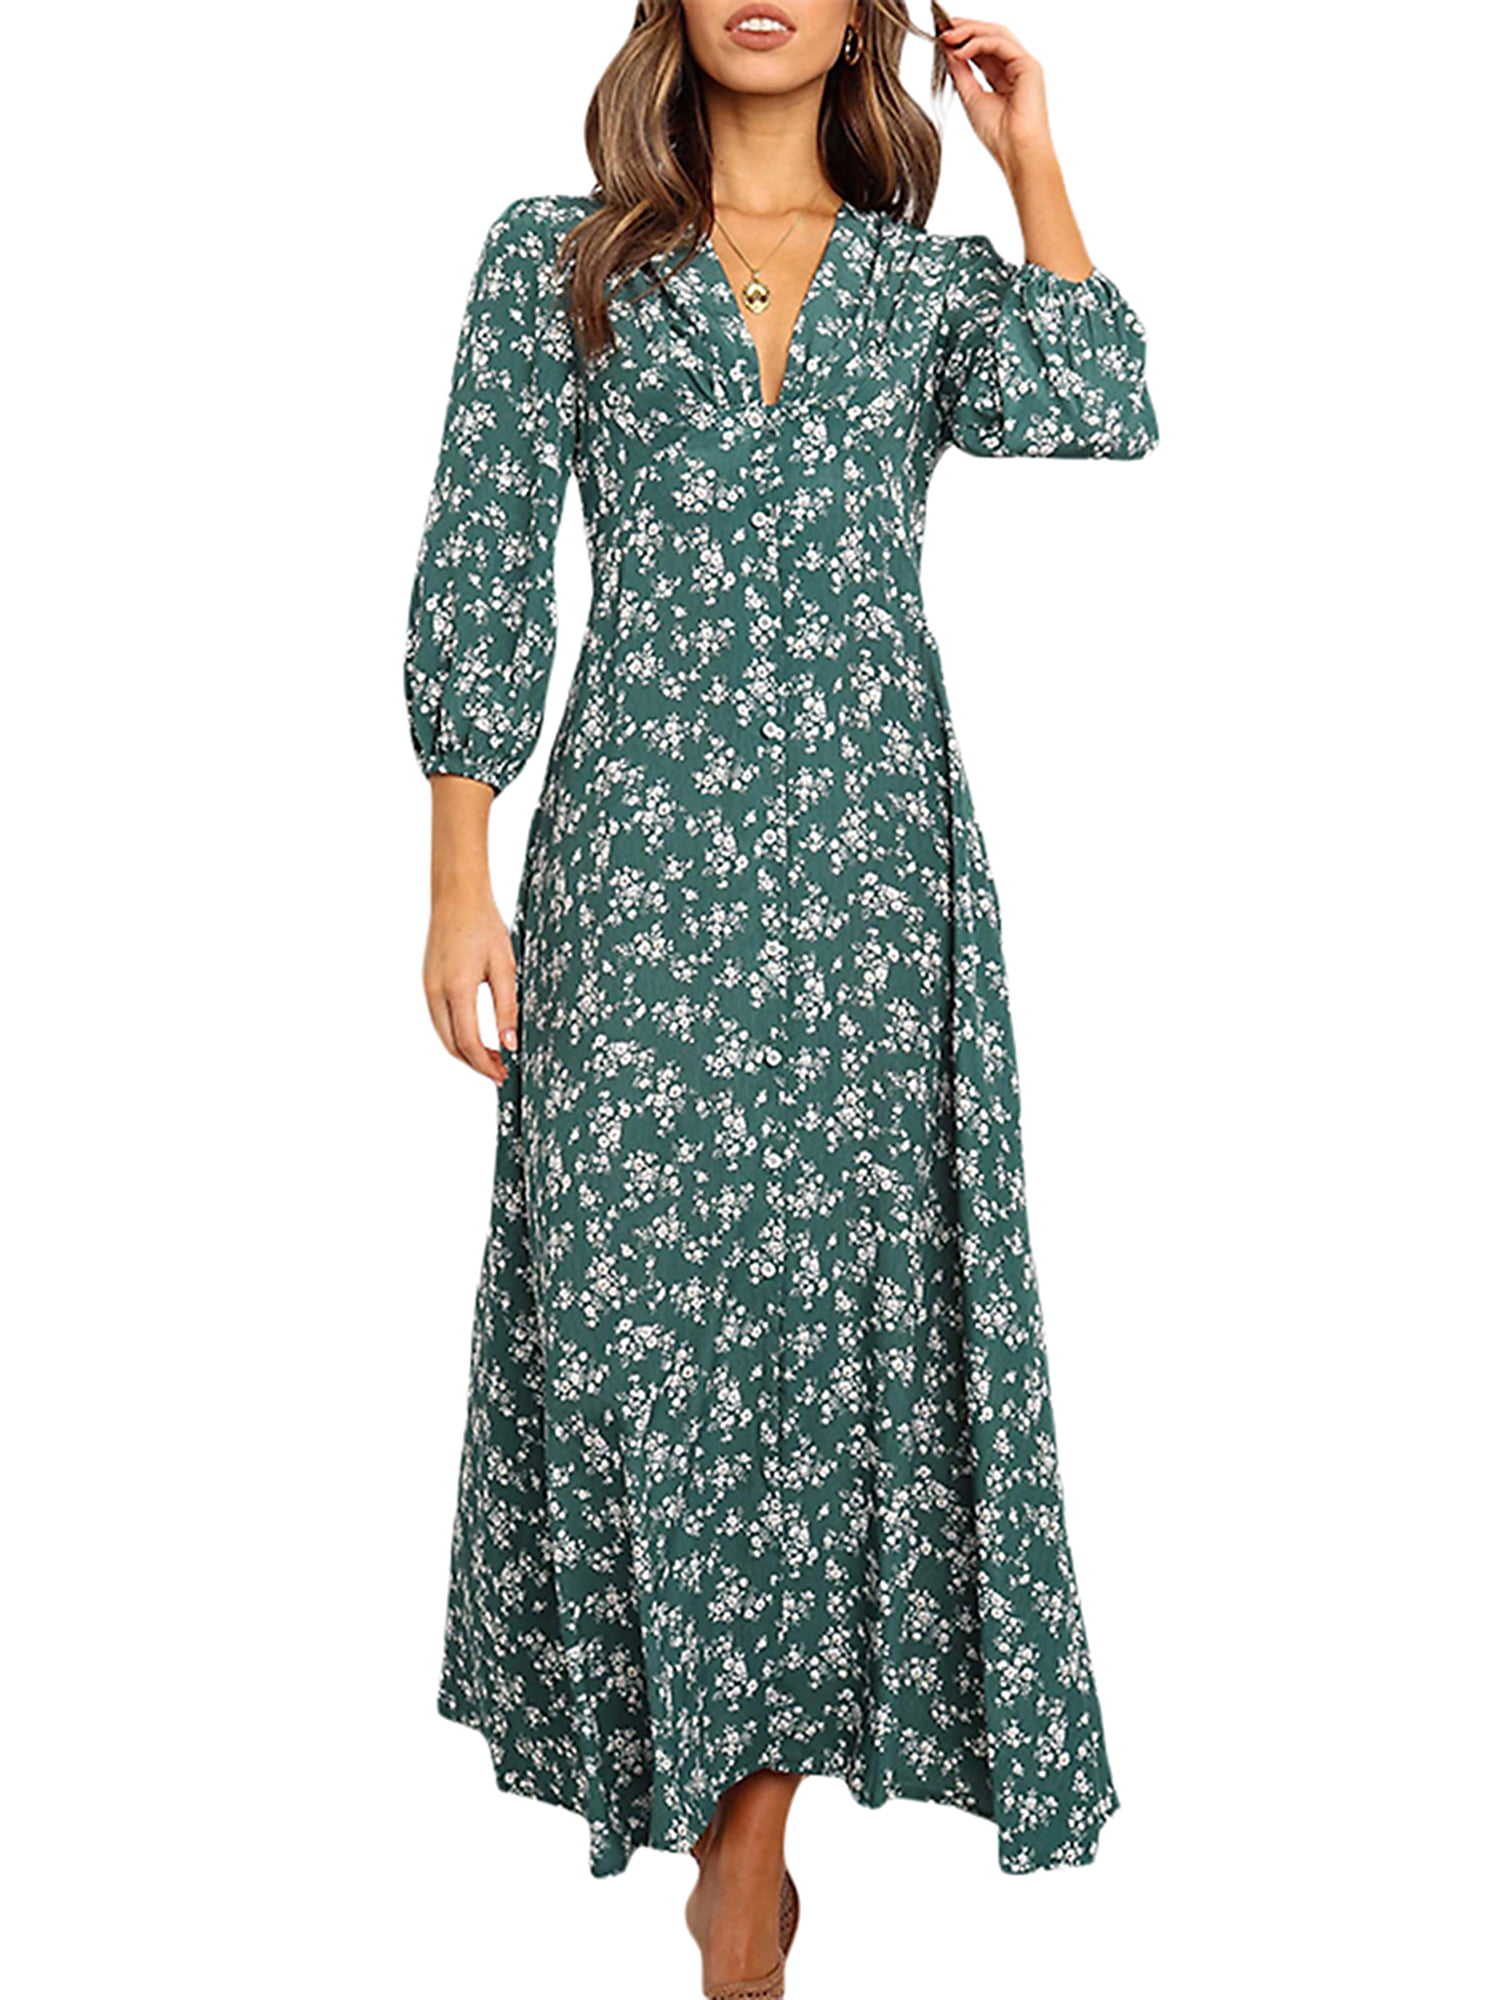 HULKY Womens Vintage 3/4 Sleeve Loose Pleated Maxi Dress Floral Print Flowy Elegant Casual A-line Long Dresses with Pockets